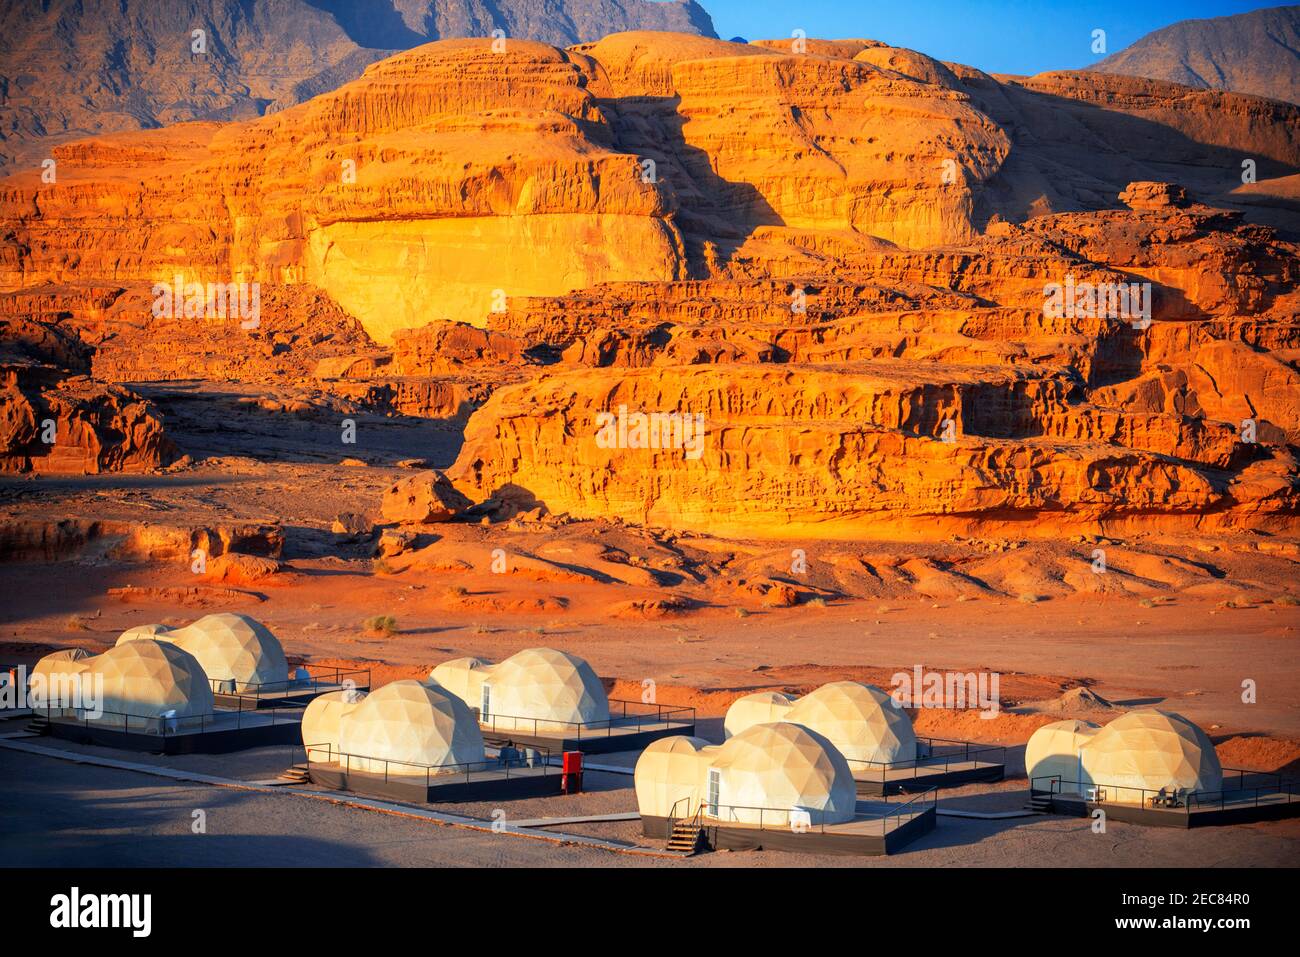 Mazayen Rum Camp bubble tents dome like hotel rooms in the style of Ridley Scott's The Martian film clustered together at SunCity camp in Wadi Rum Nat Stock Photo